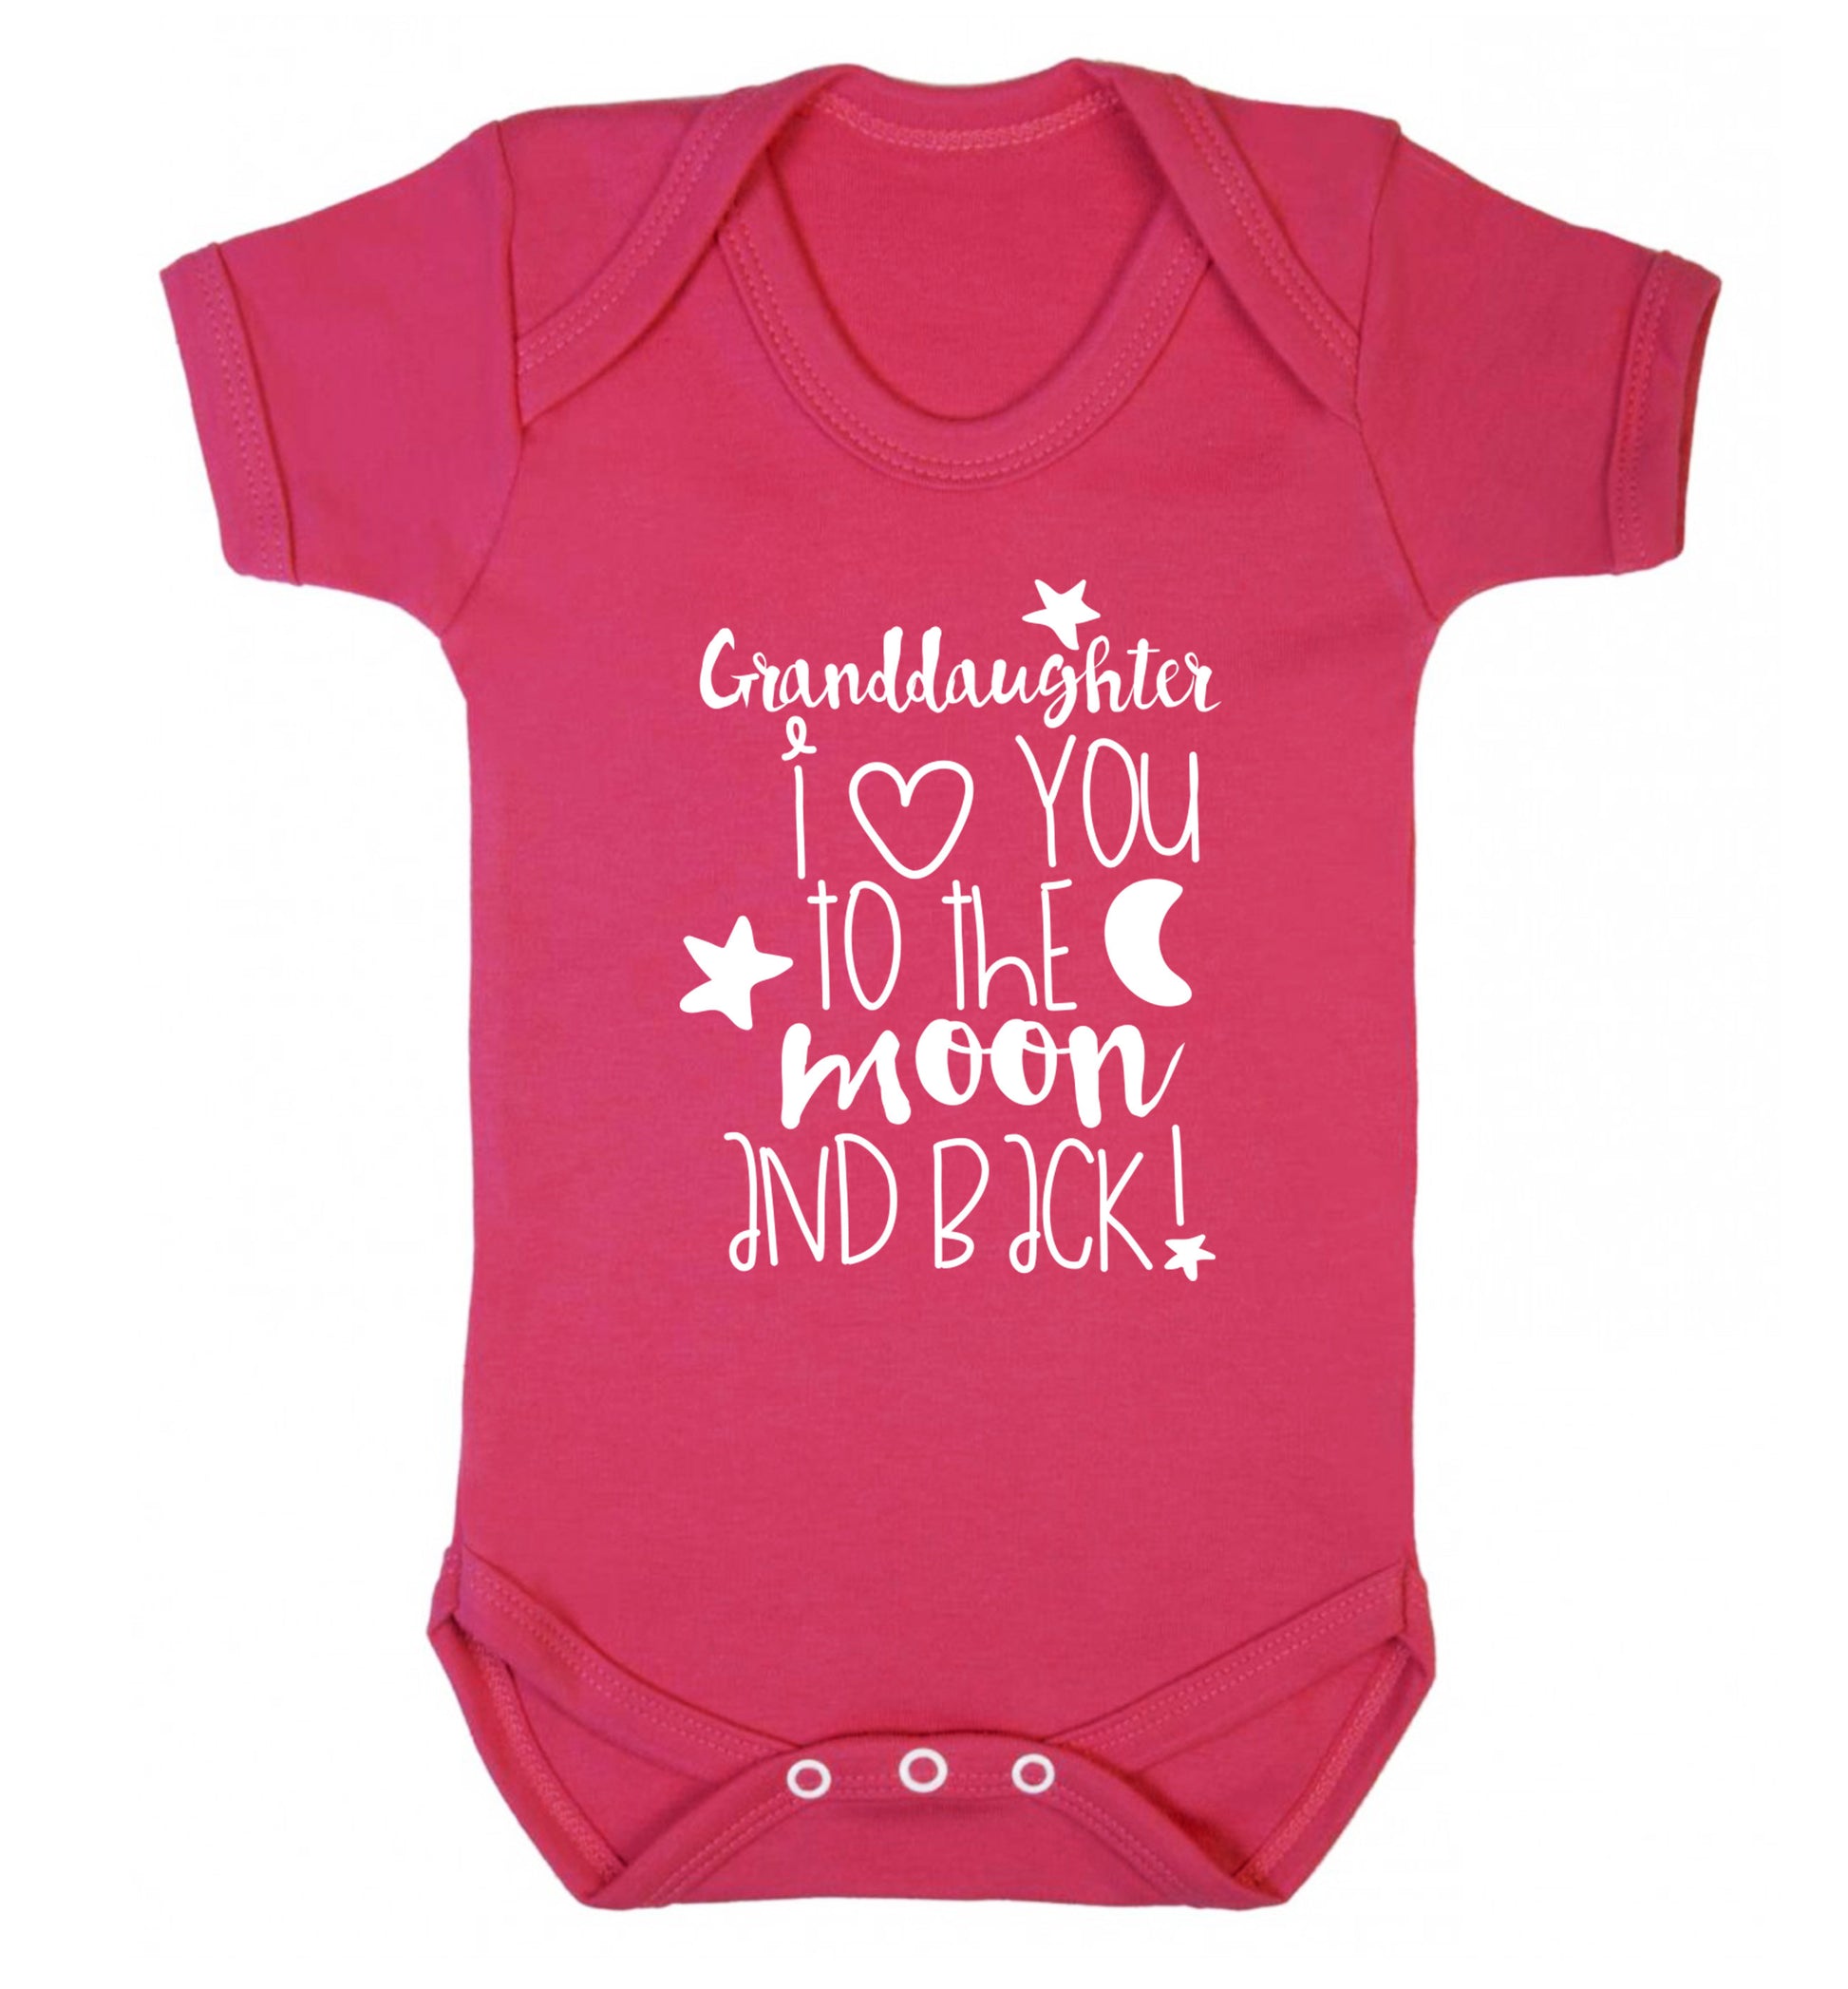 Granddaughter I love you to the moon and back Baby Vest dark pink 18-24 months